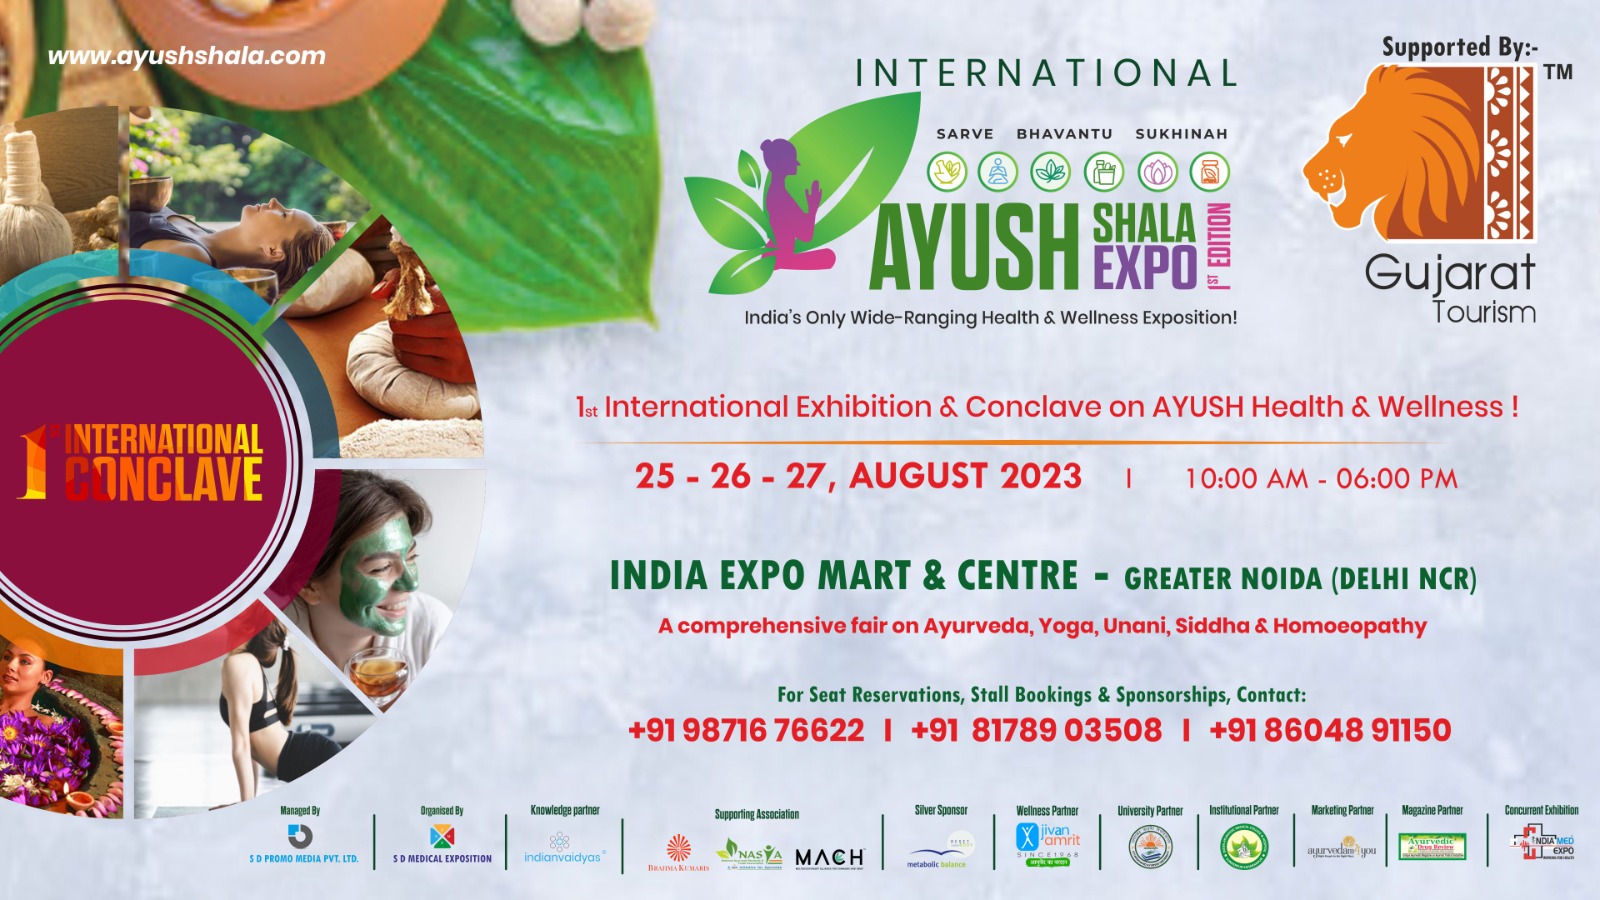 The Ayushshala Expo 2023 has 50 days left from now